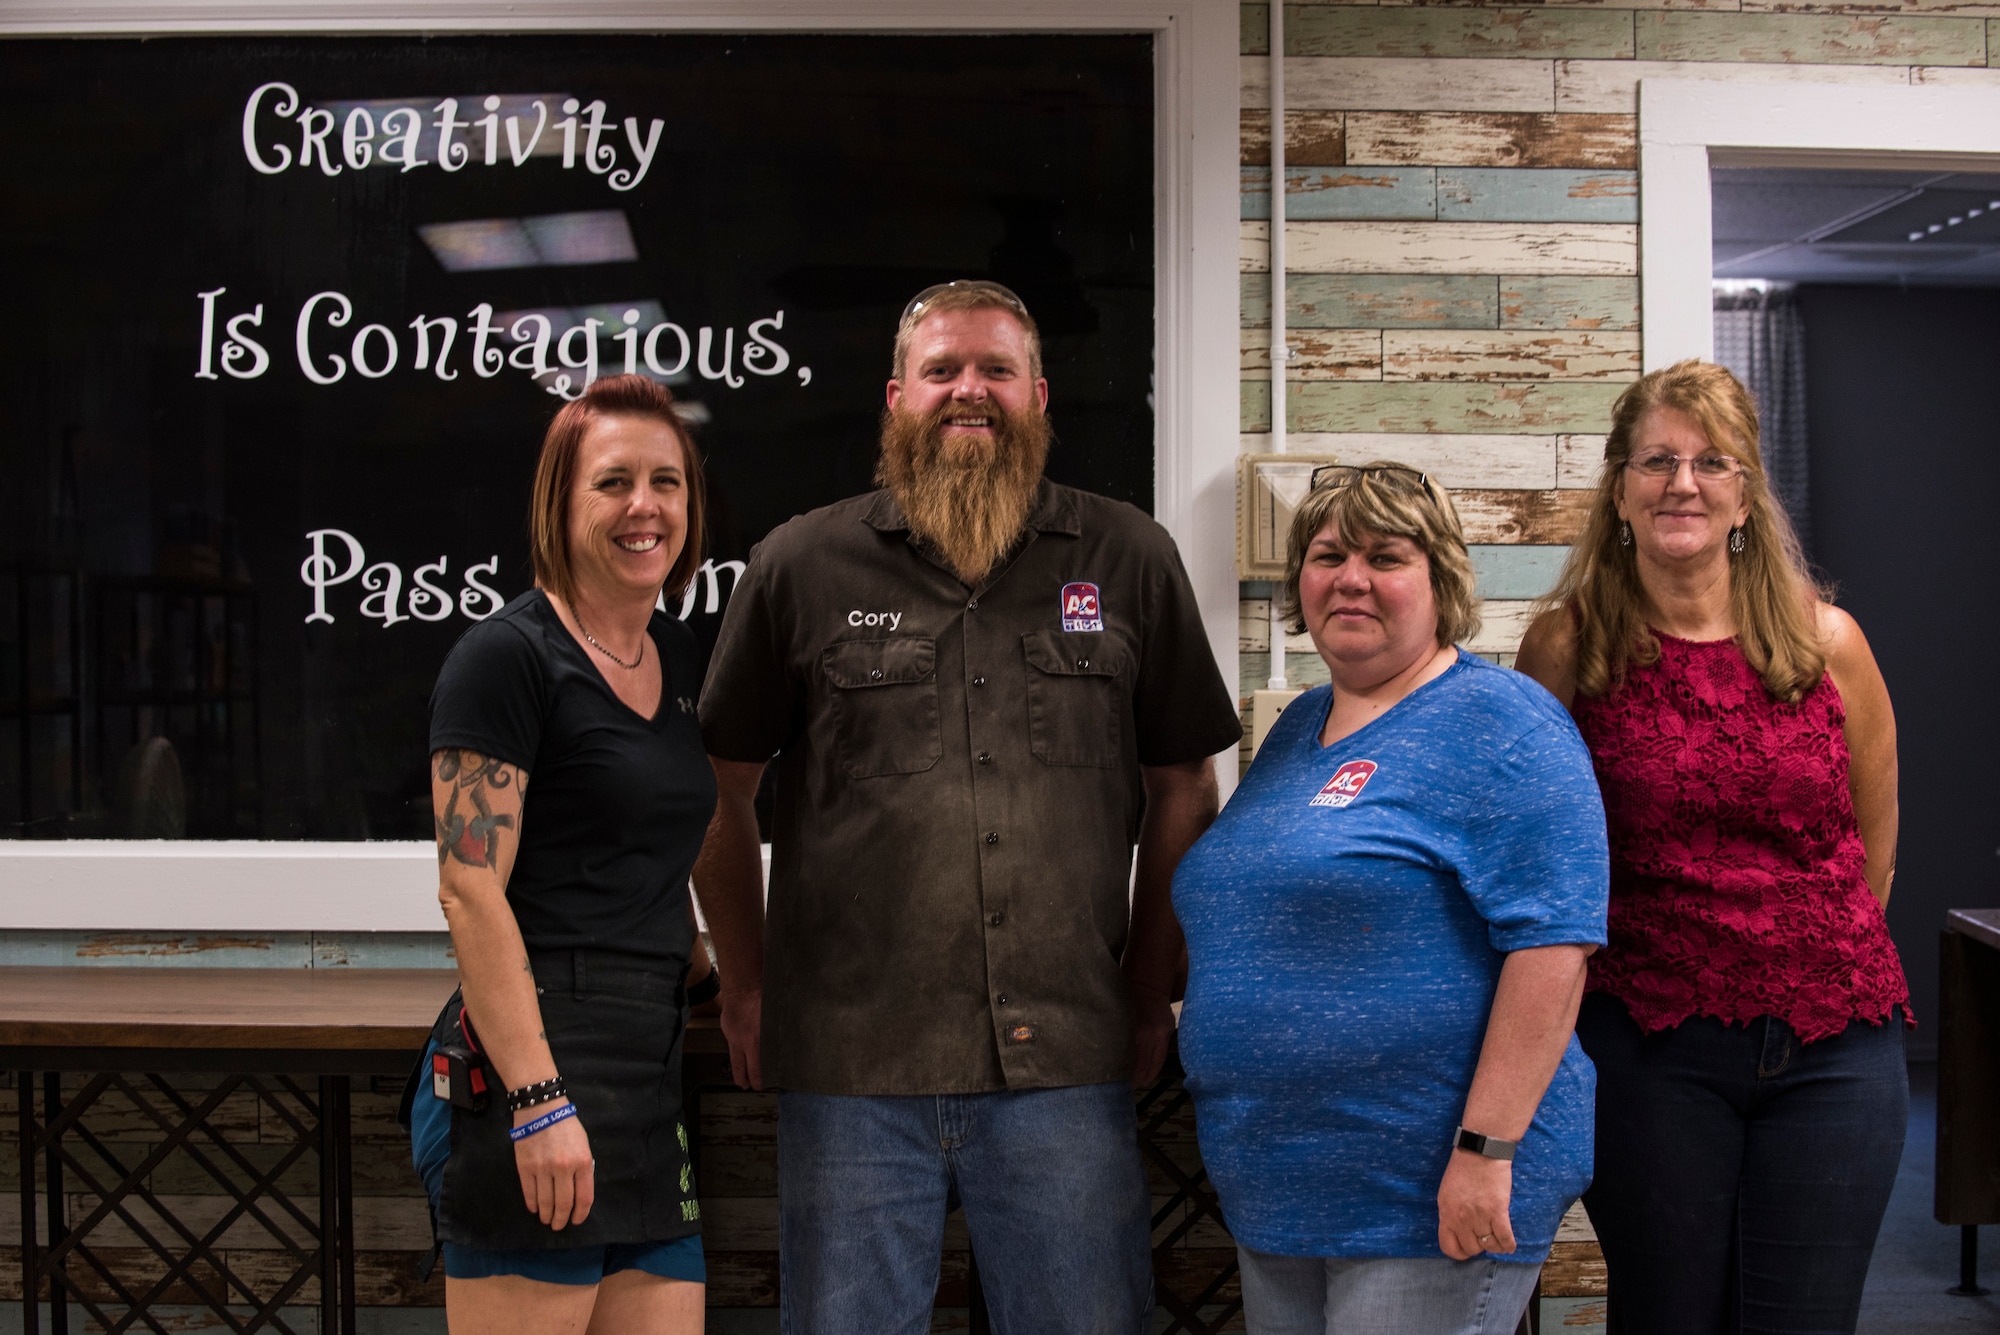 The 90th Force Support Squadron Arts and Crafts Center employees pose for a photo in front of their newly renovated craft wall with the quote “Creativity is contagious. Pass it on” by Albert Einstein June 27, 2018, on F.E. Warren Air Force Base, Wyo. The center is open Tuesday through Friday, 10 a.m. to 5 p.m. and welcomes anyone with base access to walk in and learn how they can best utilize the facility or place a custom order. (U.S. Air Force photo by Senior Airman Abbigayle Williams)